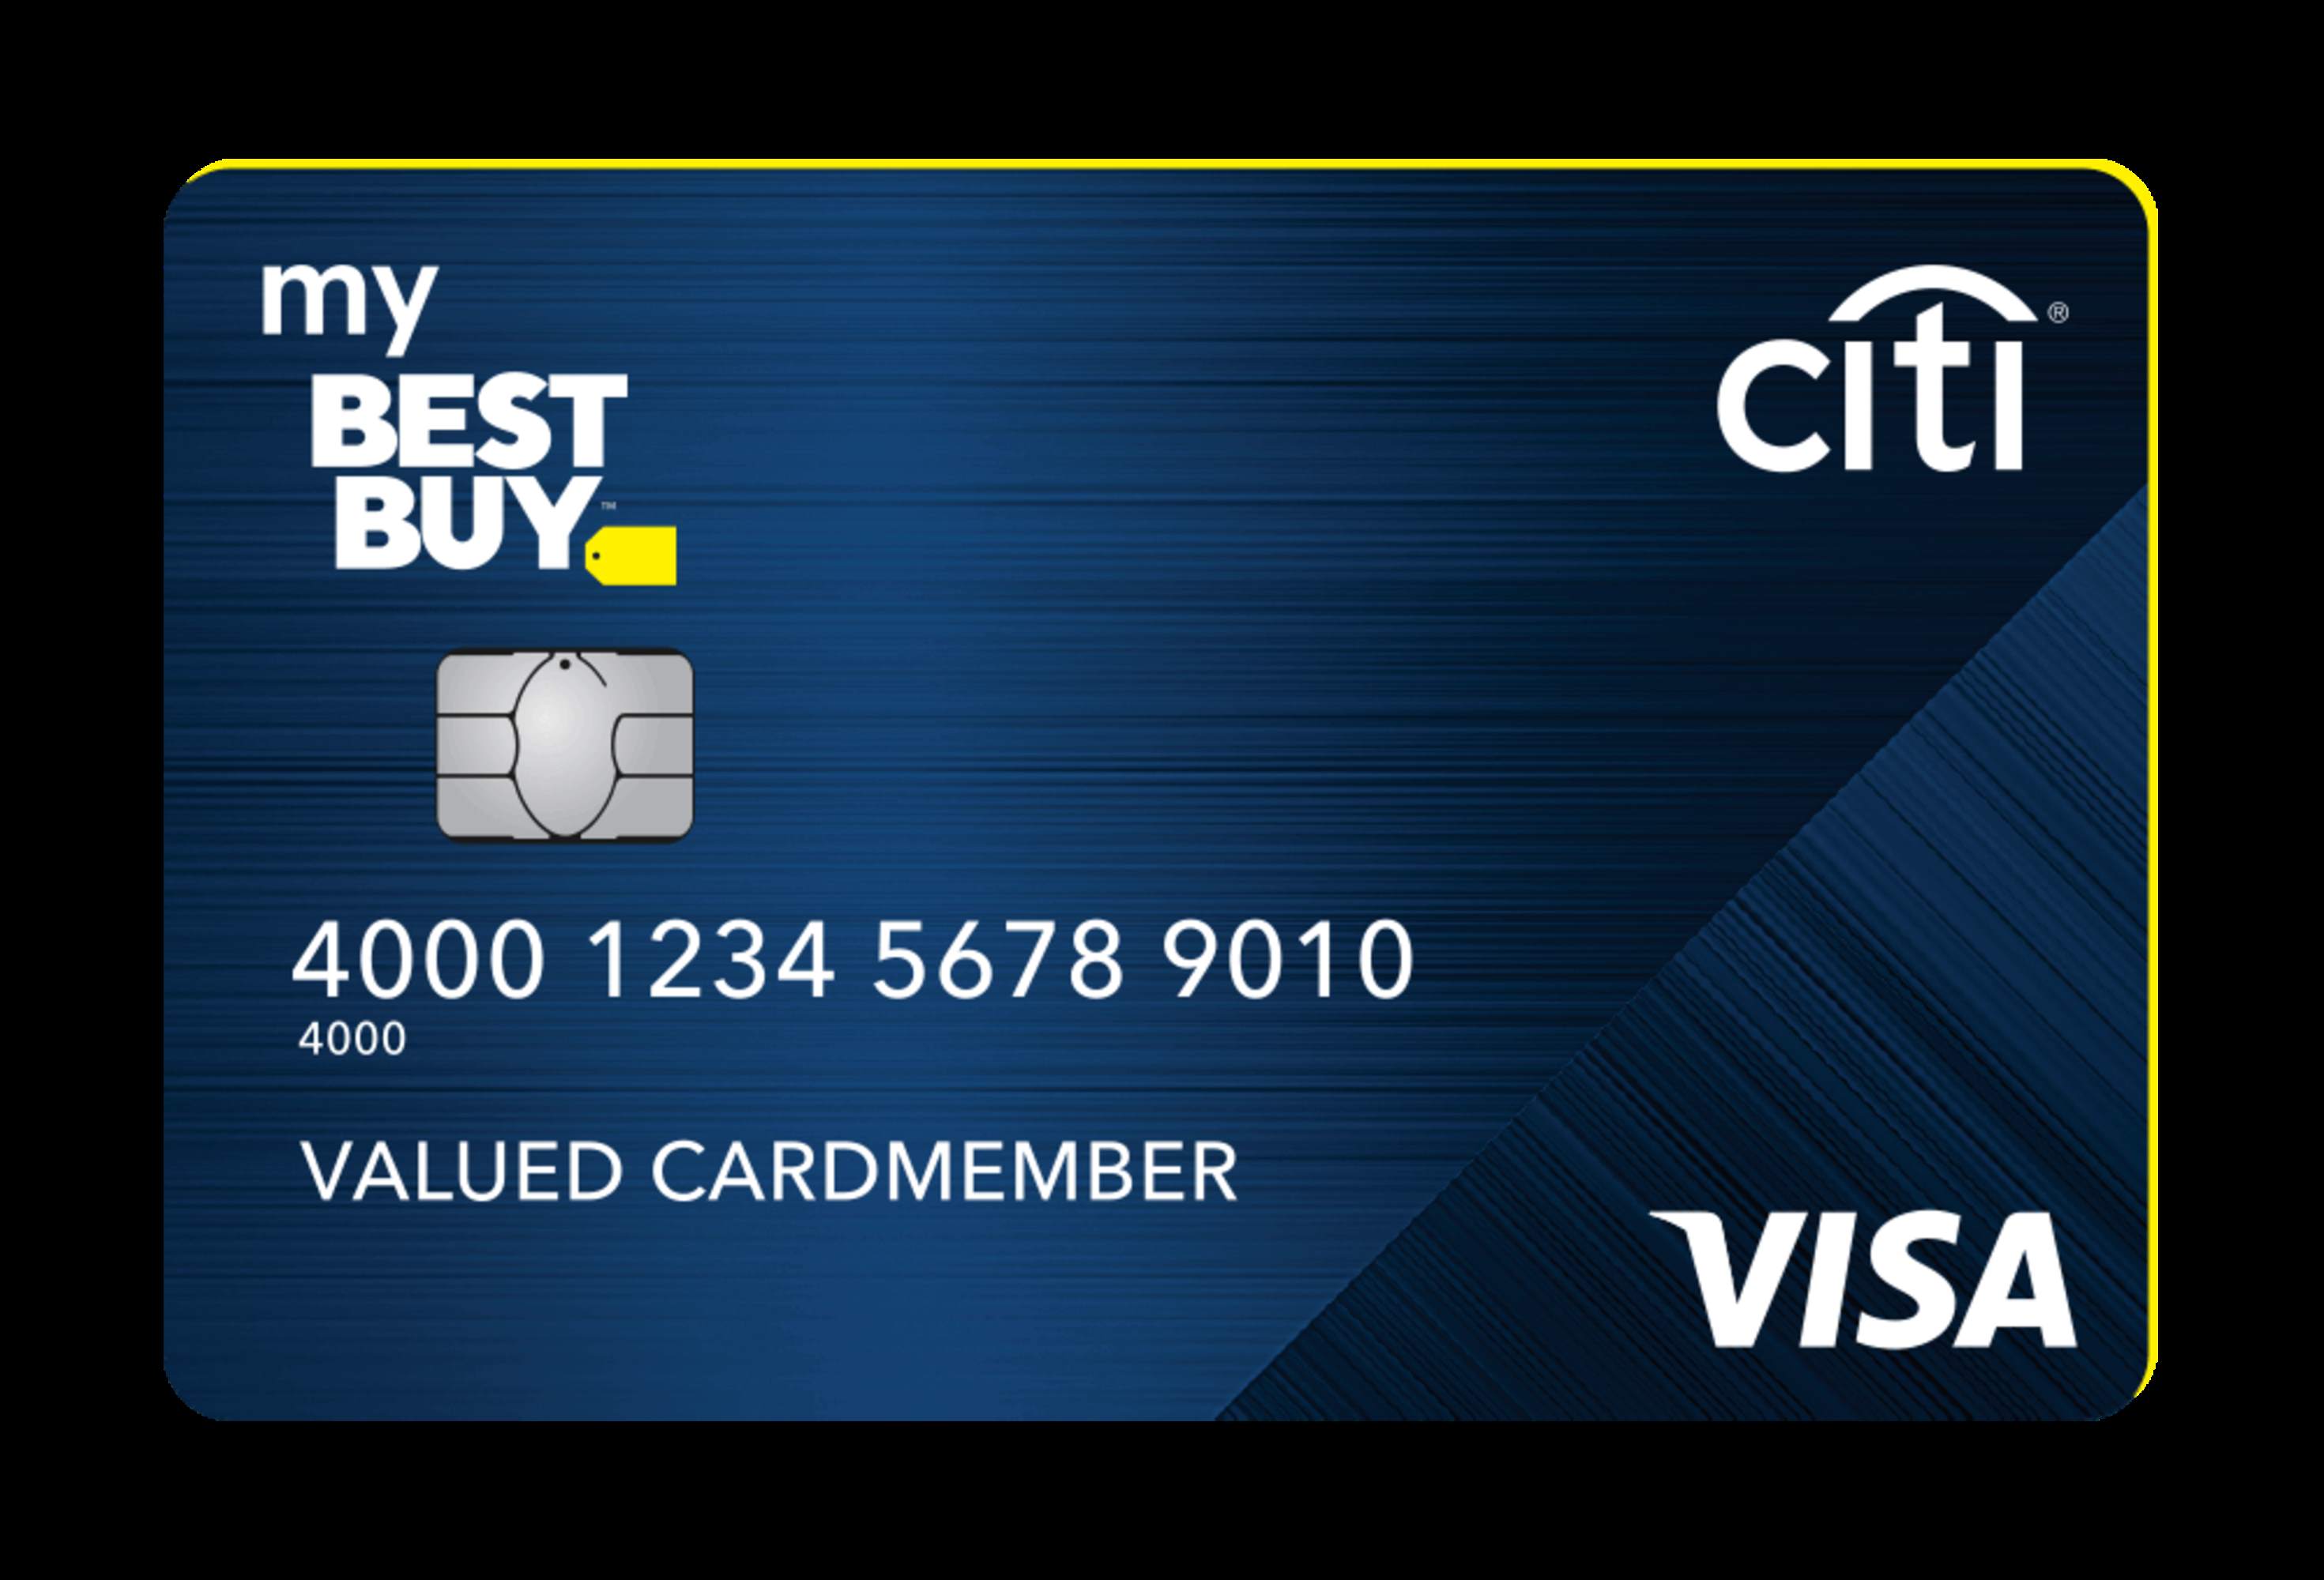 How To Cancel My Best Buy Credit Card